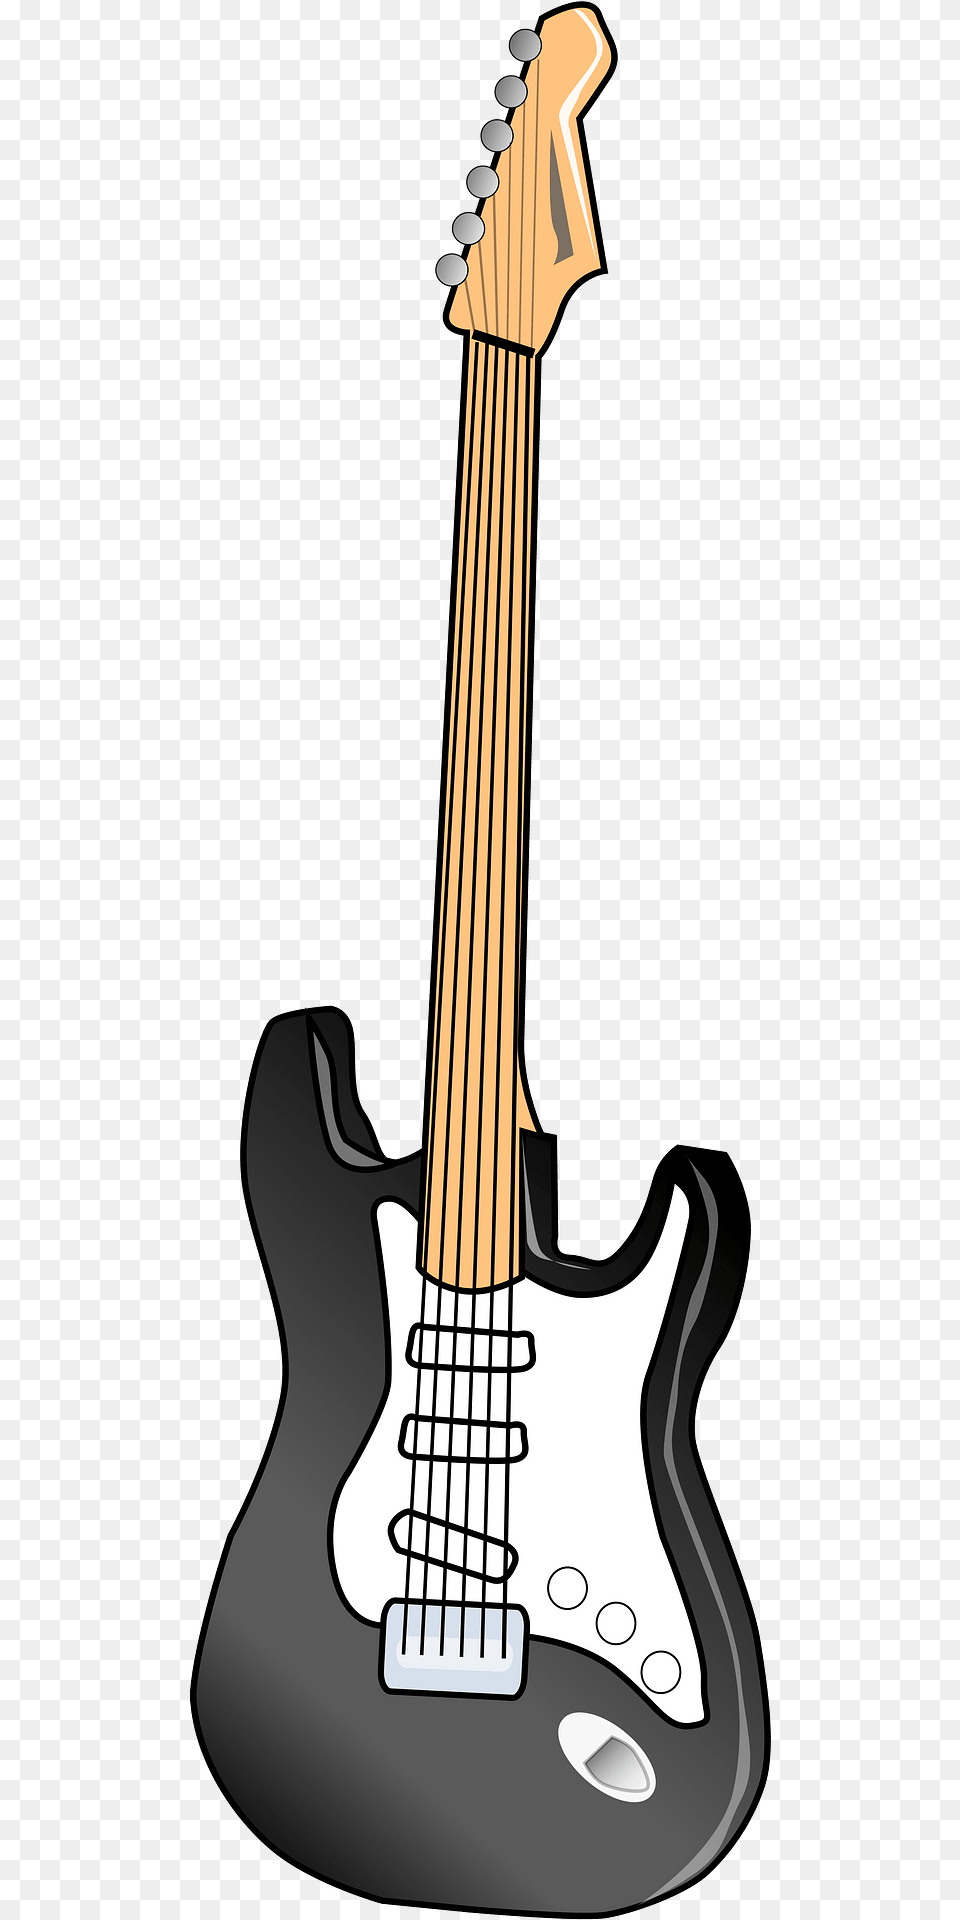 Guitar Clipart, Bass Guitar, Musical Instrument, Smoke Pipe Free Png Download